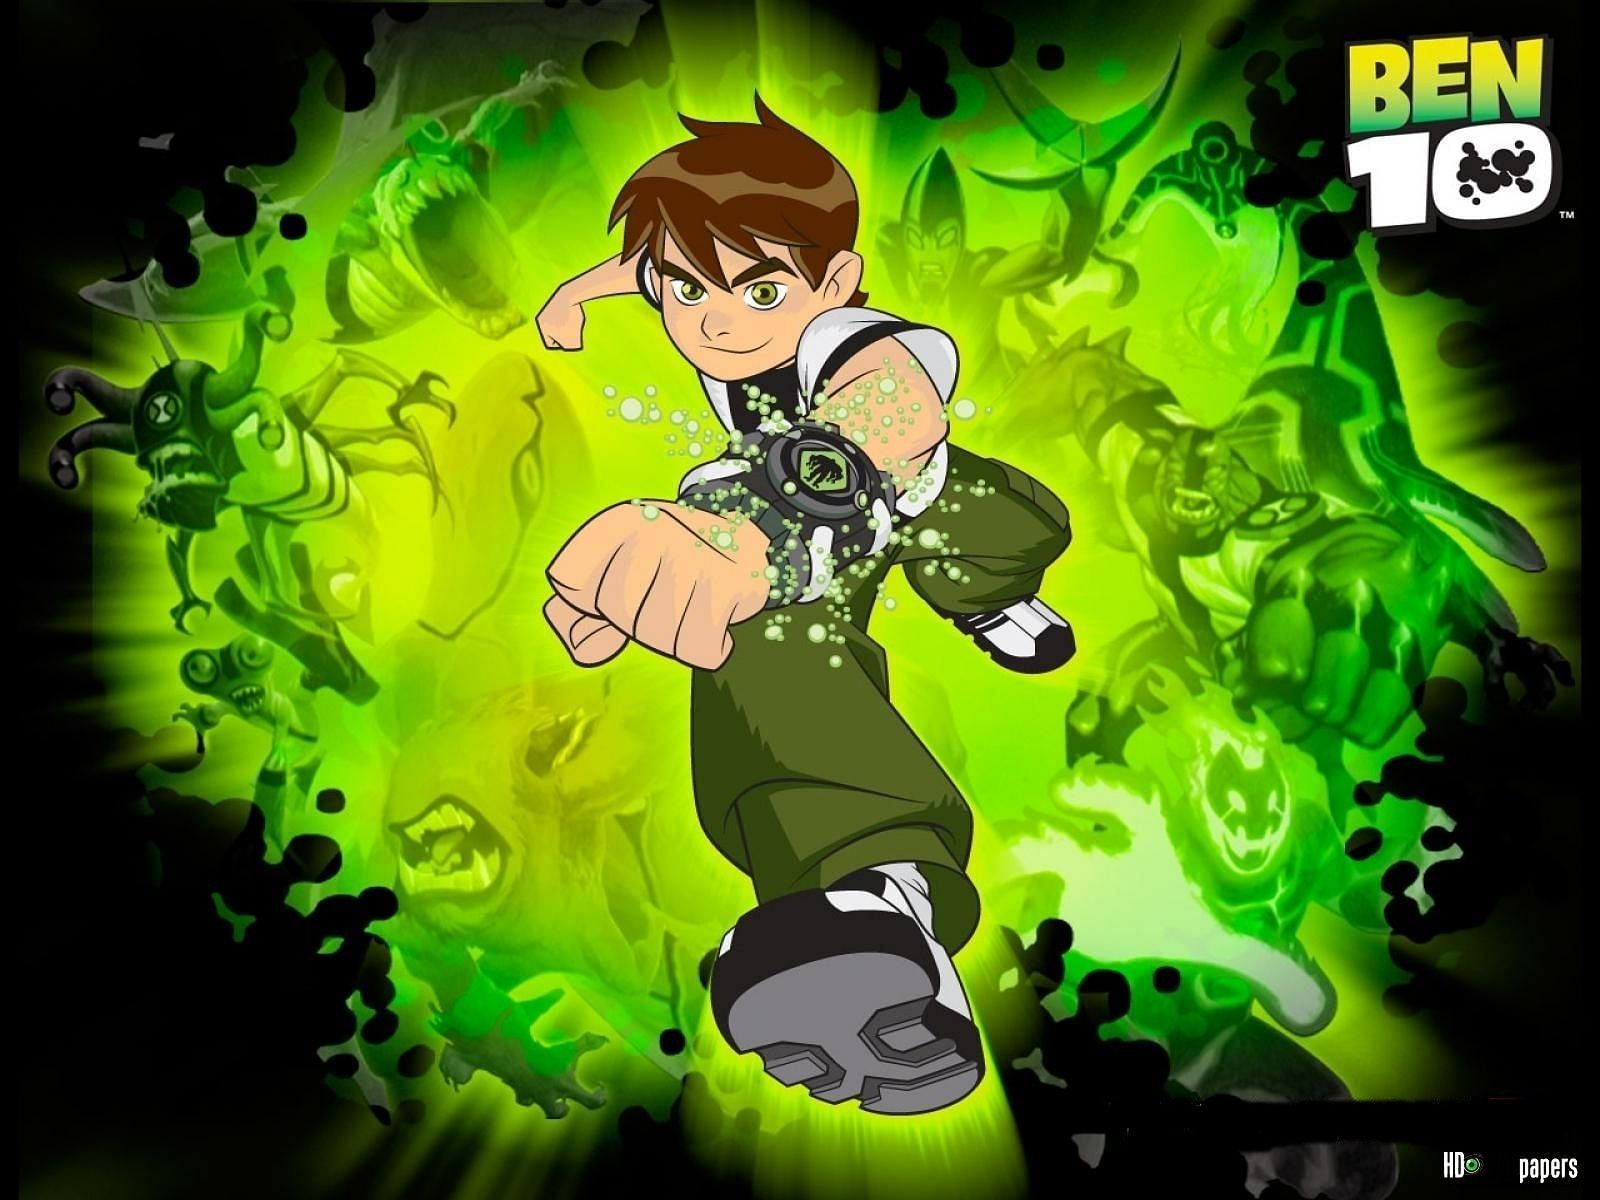 Ben 10 animated reboot could have a storyline with adult undertones, says creator Duncan Rouleau (Imag via Cartoon Network Studios)